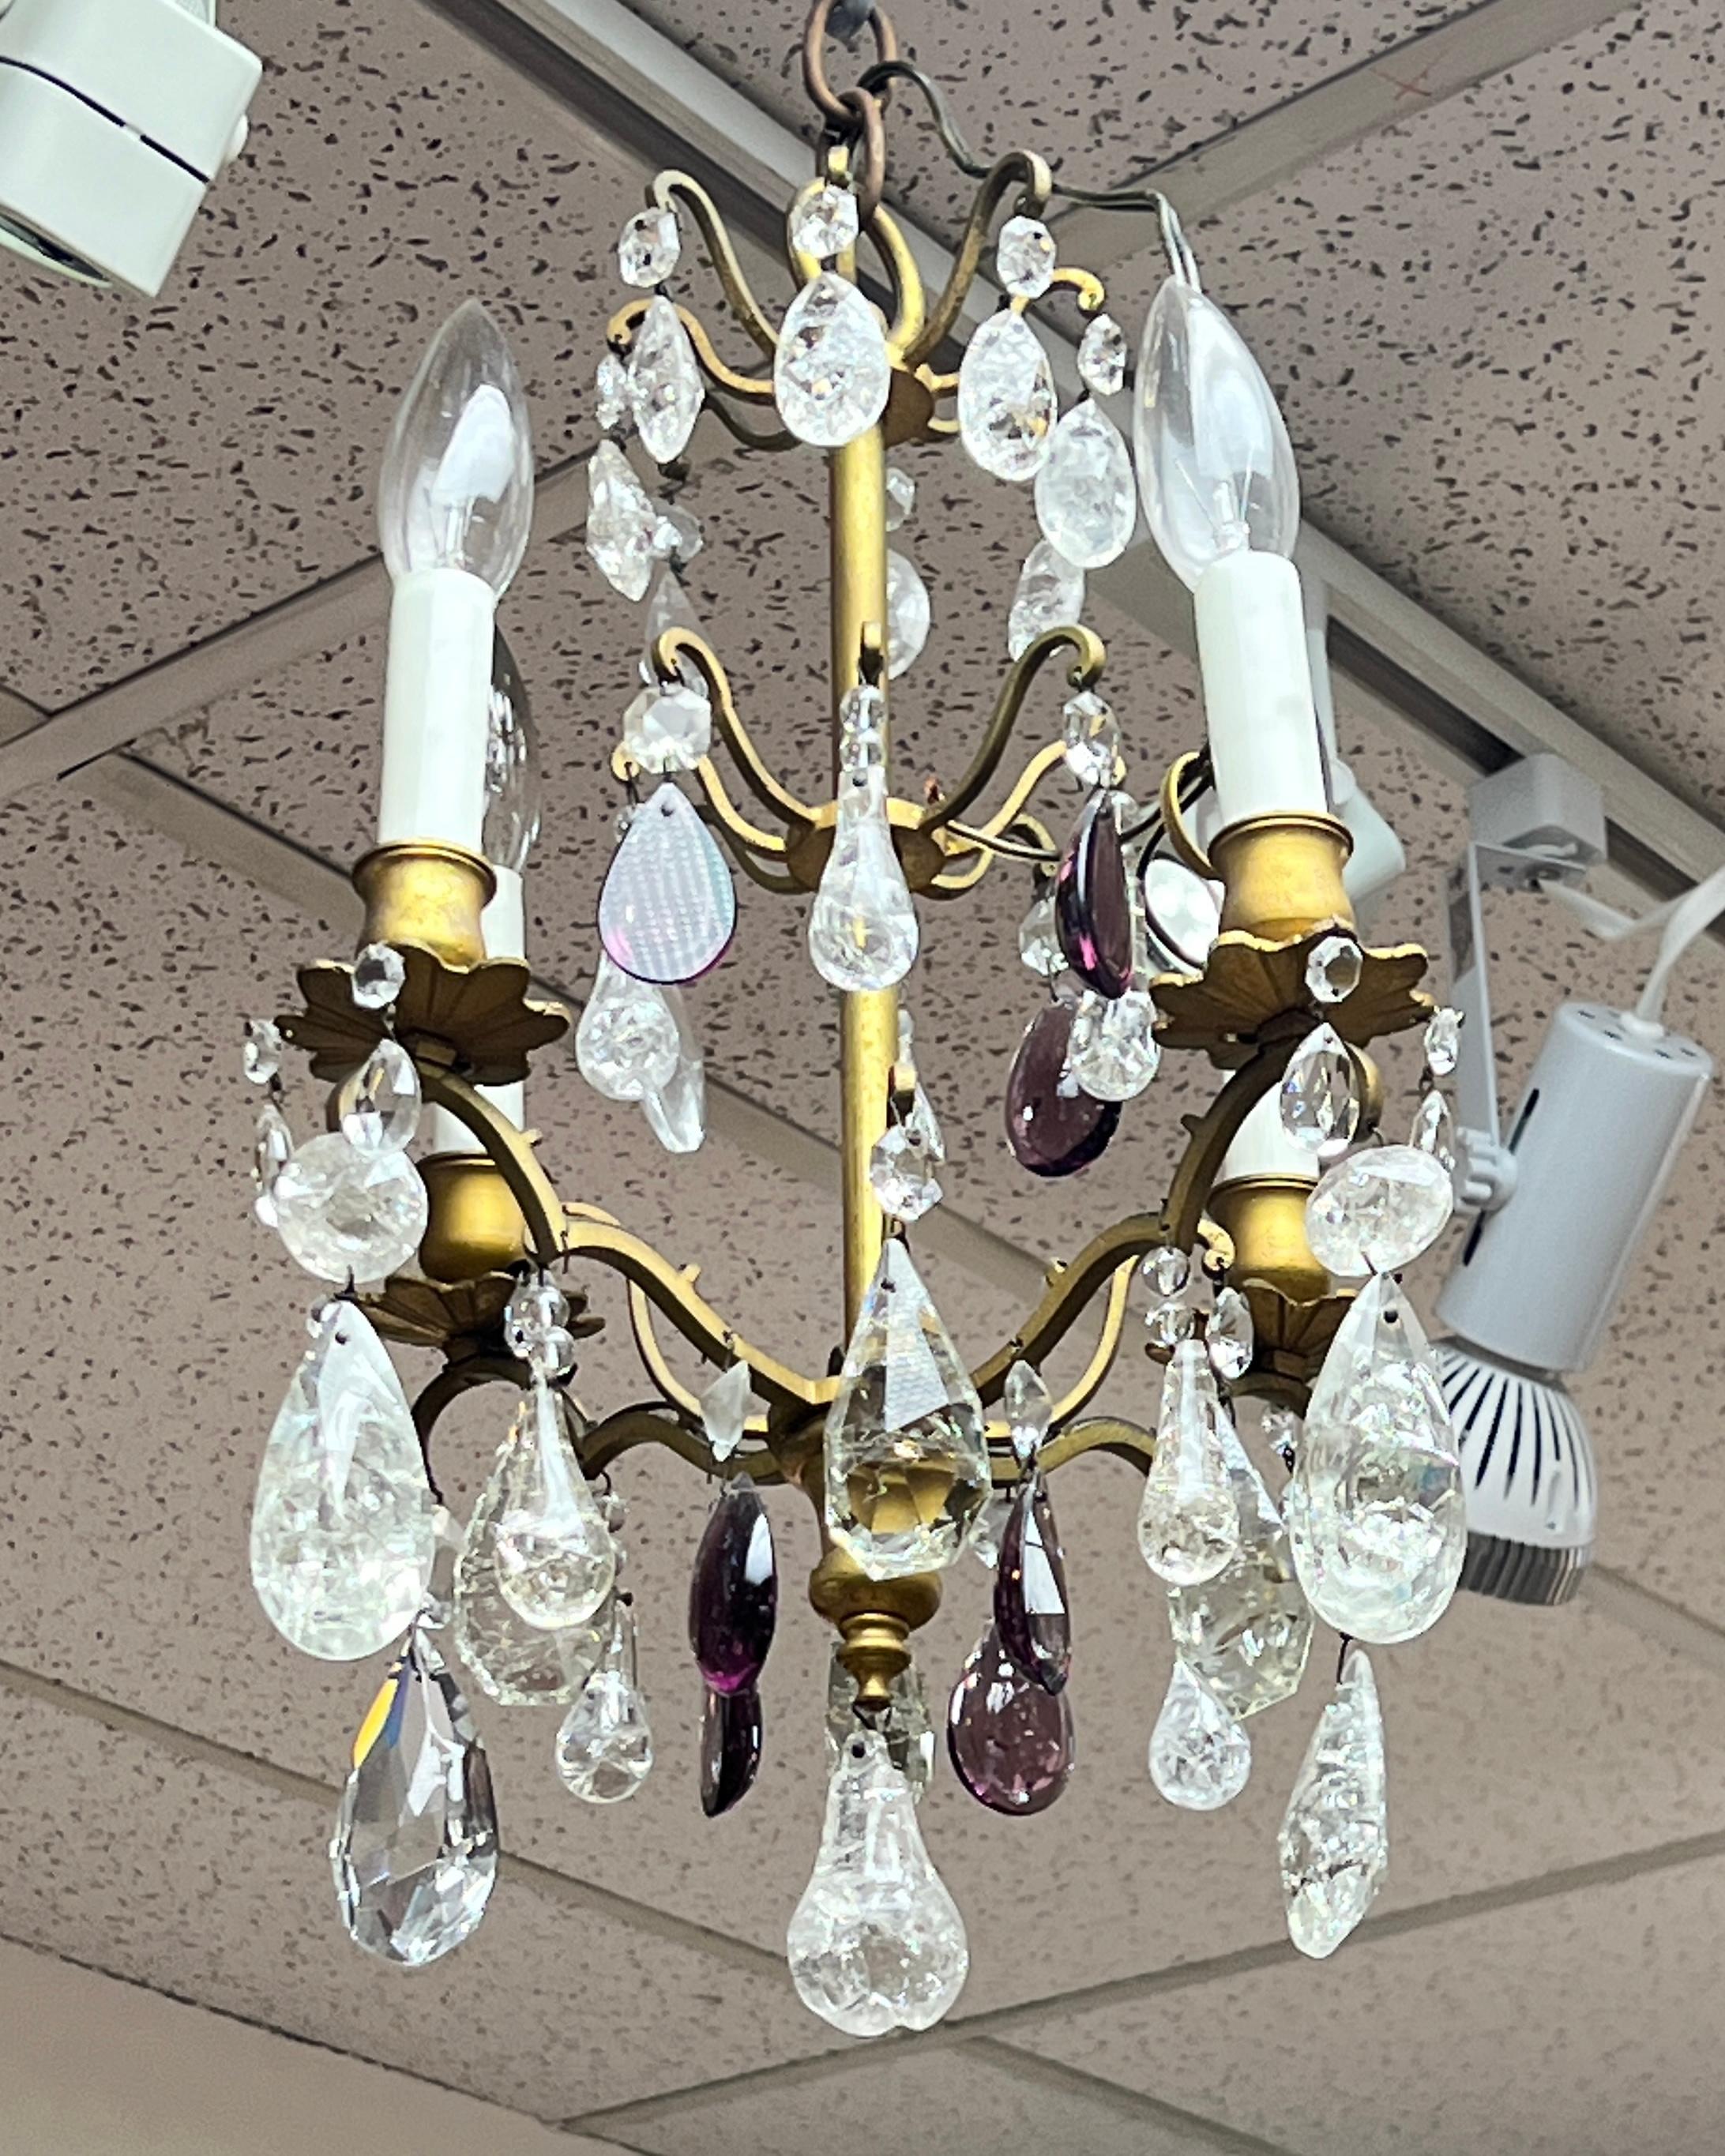 Our petite bronze chandelier in the fashion of Maison Bagues dates from the late 19th to early 20th century. It features glass and rock crystal pendants and violet colored drops and is ready for installation with four electrified candle arms.